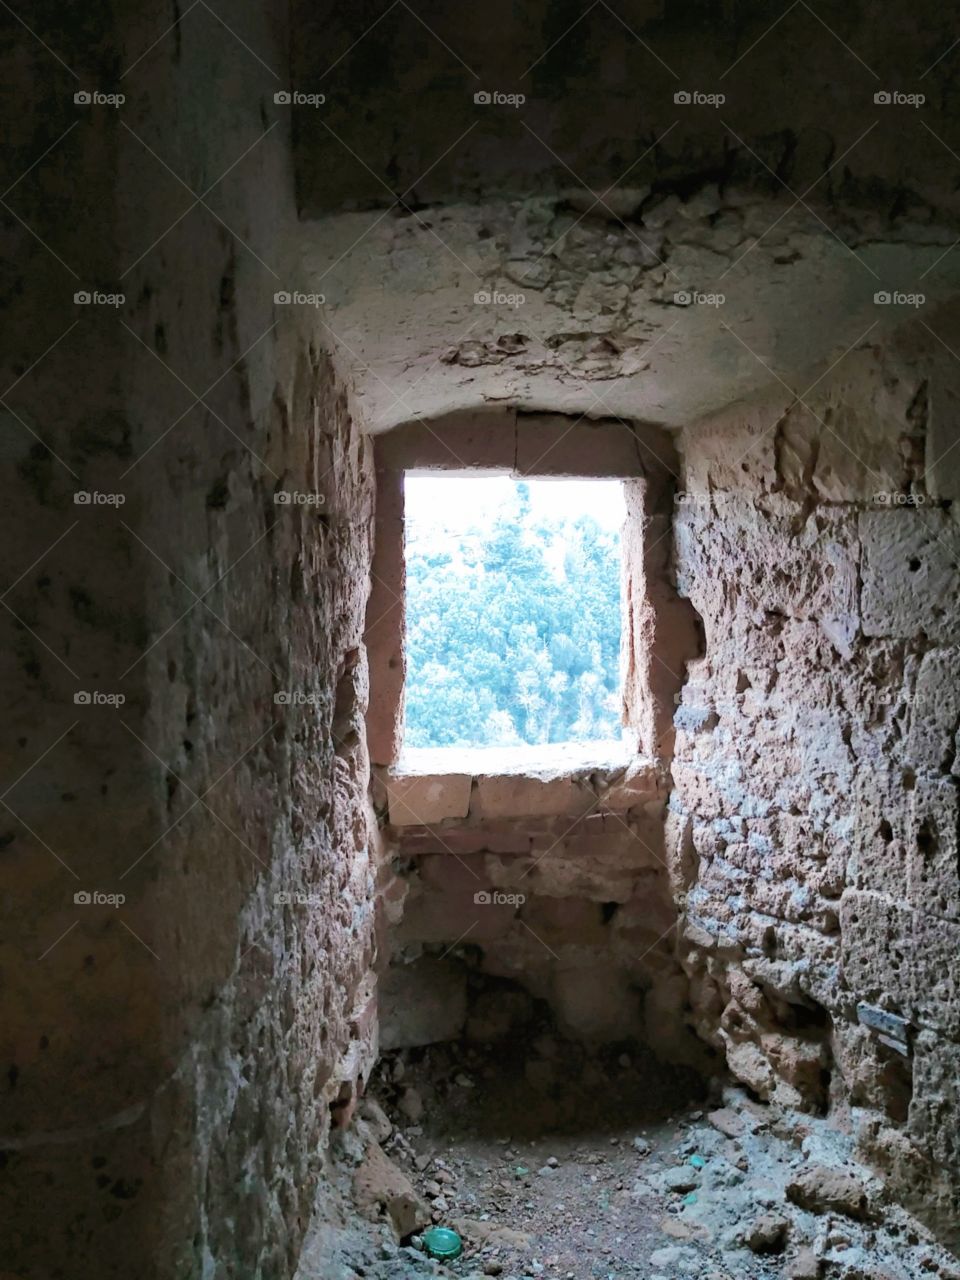 A window in the cave